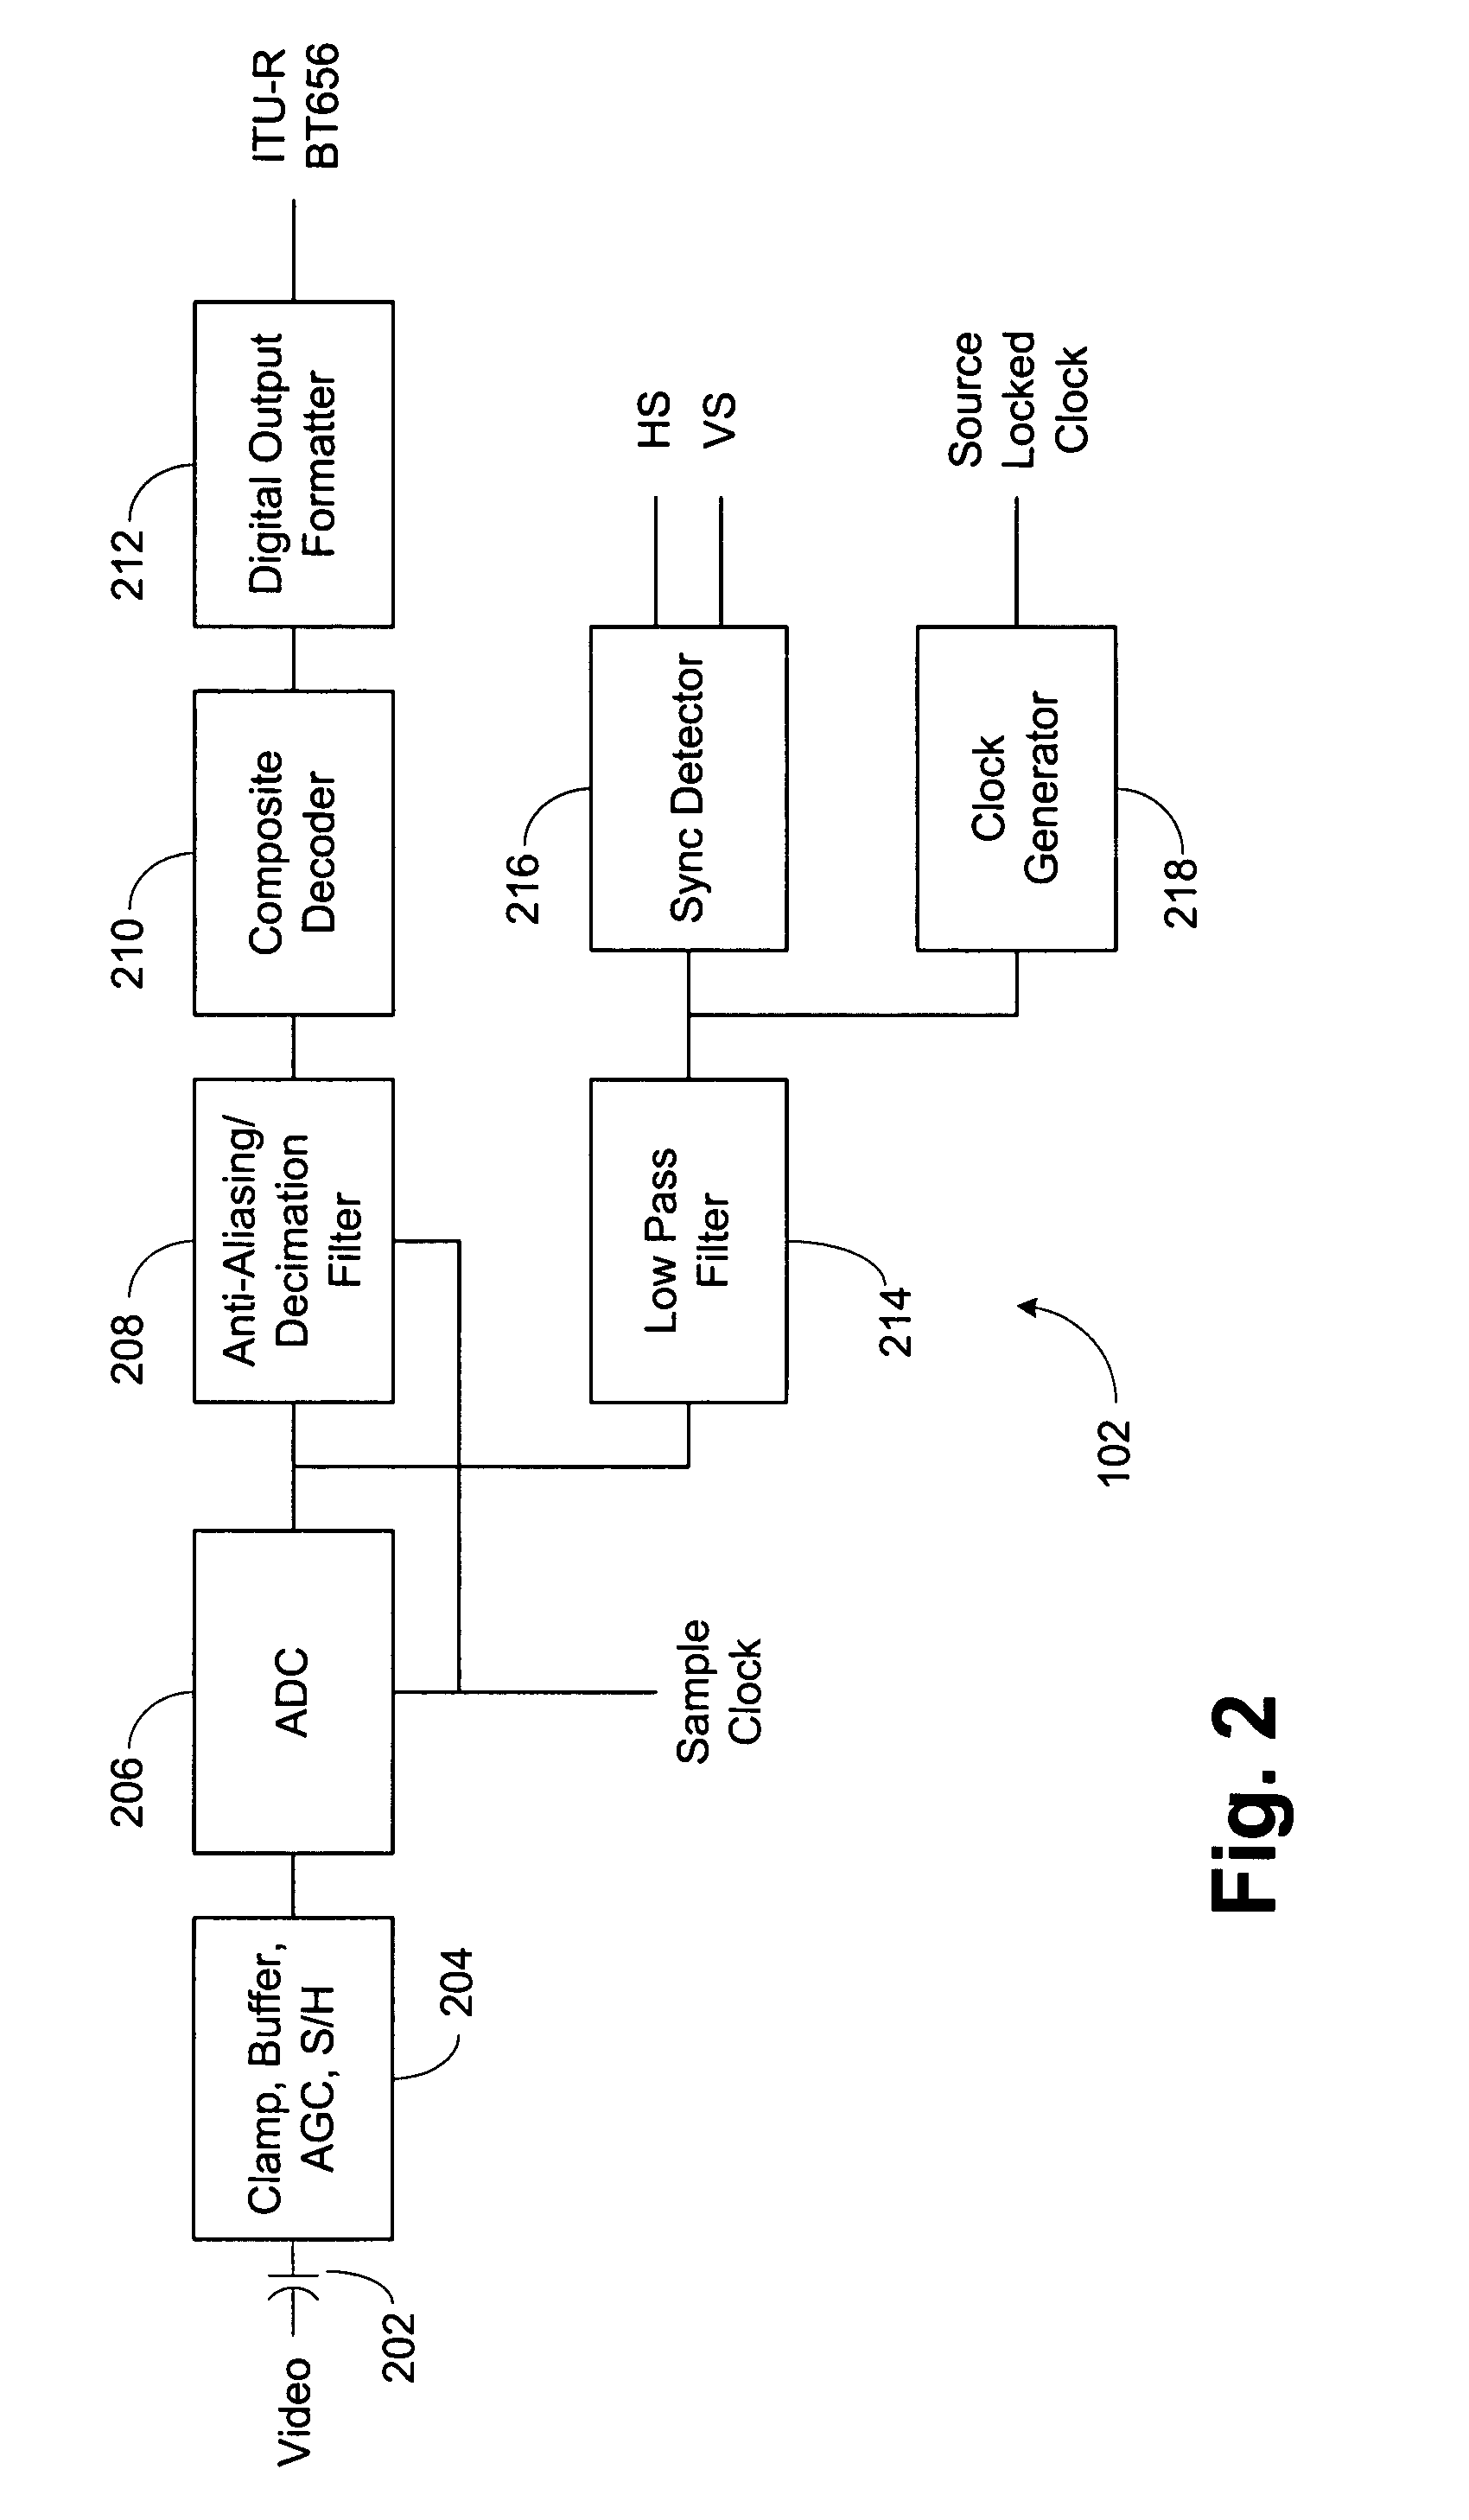 Method and apparatus for AC coupling a signal while restoring DC levels